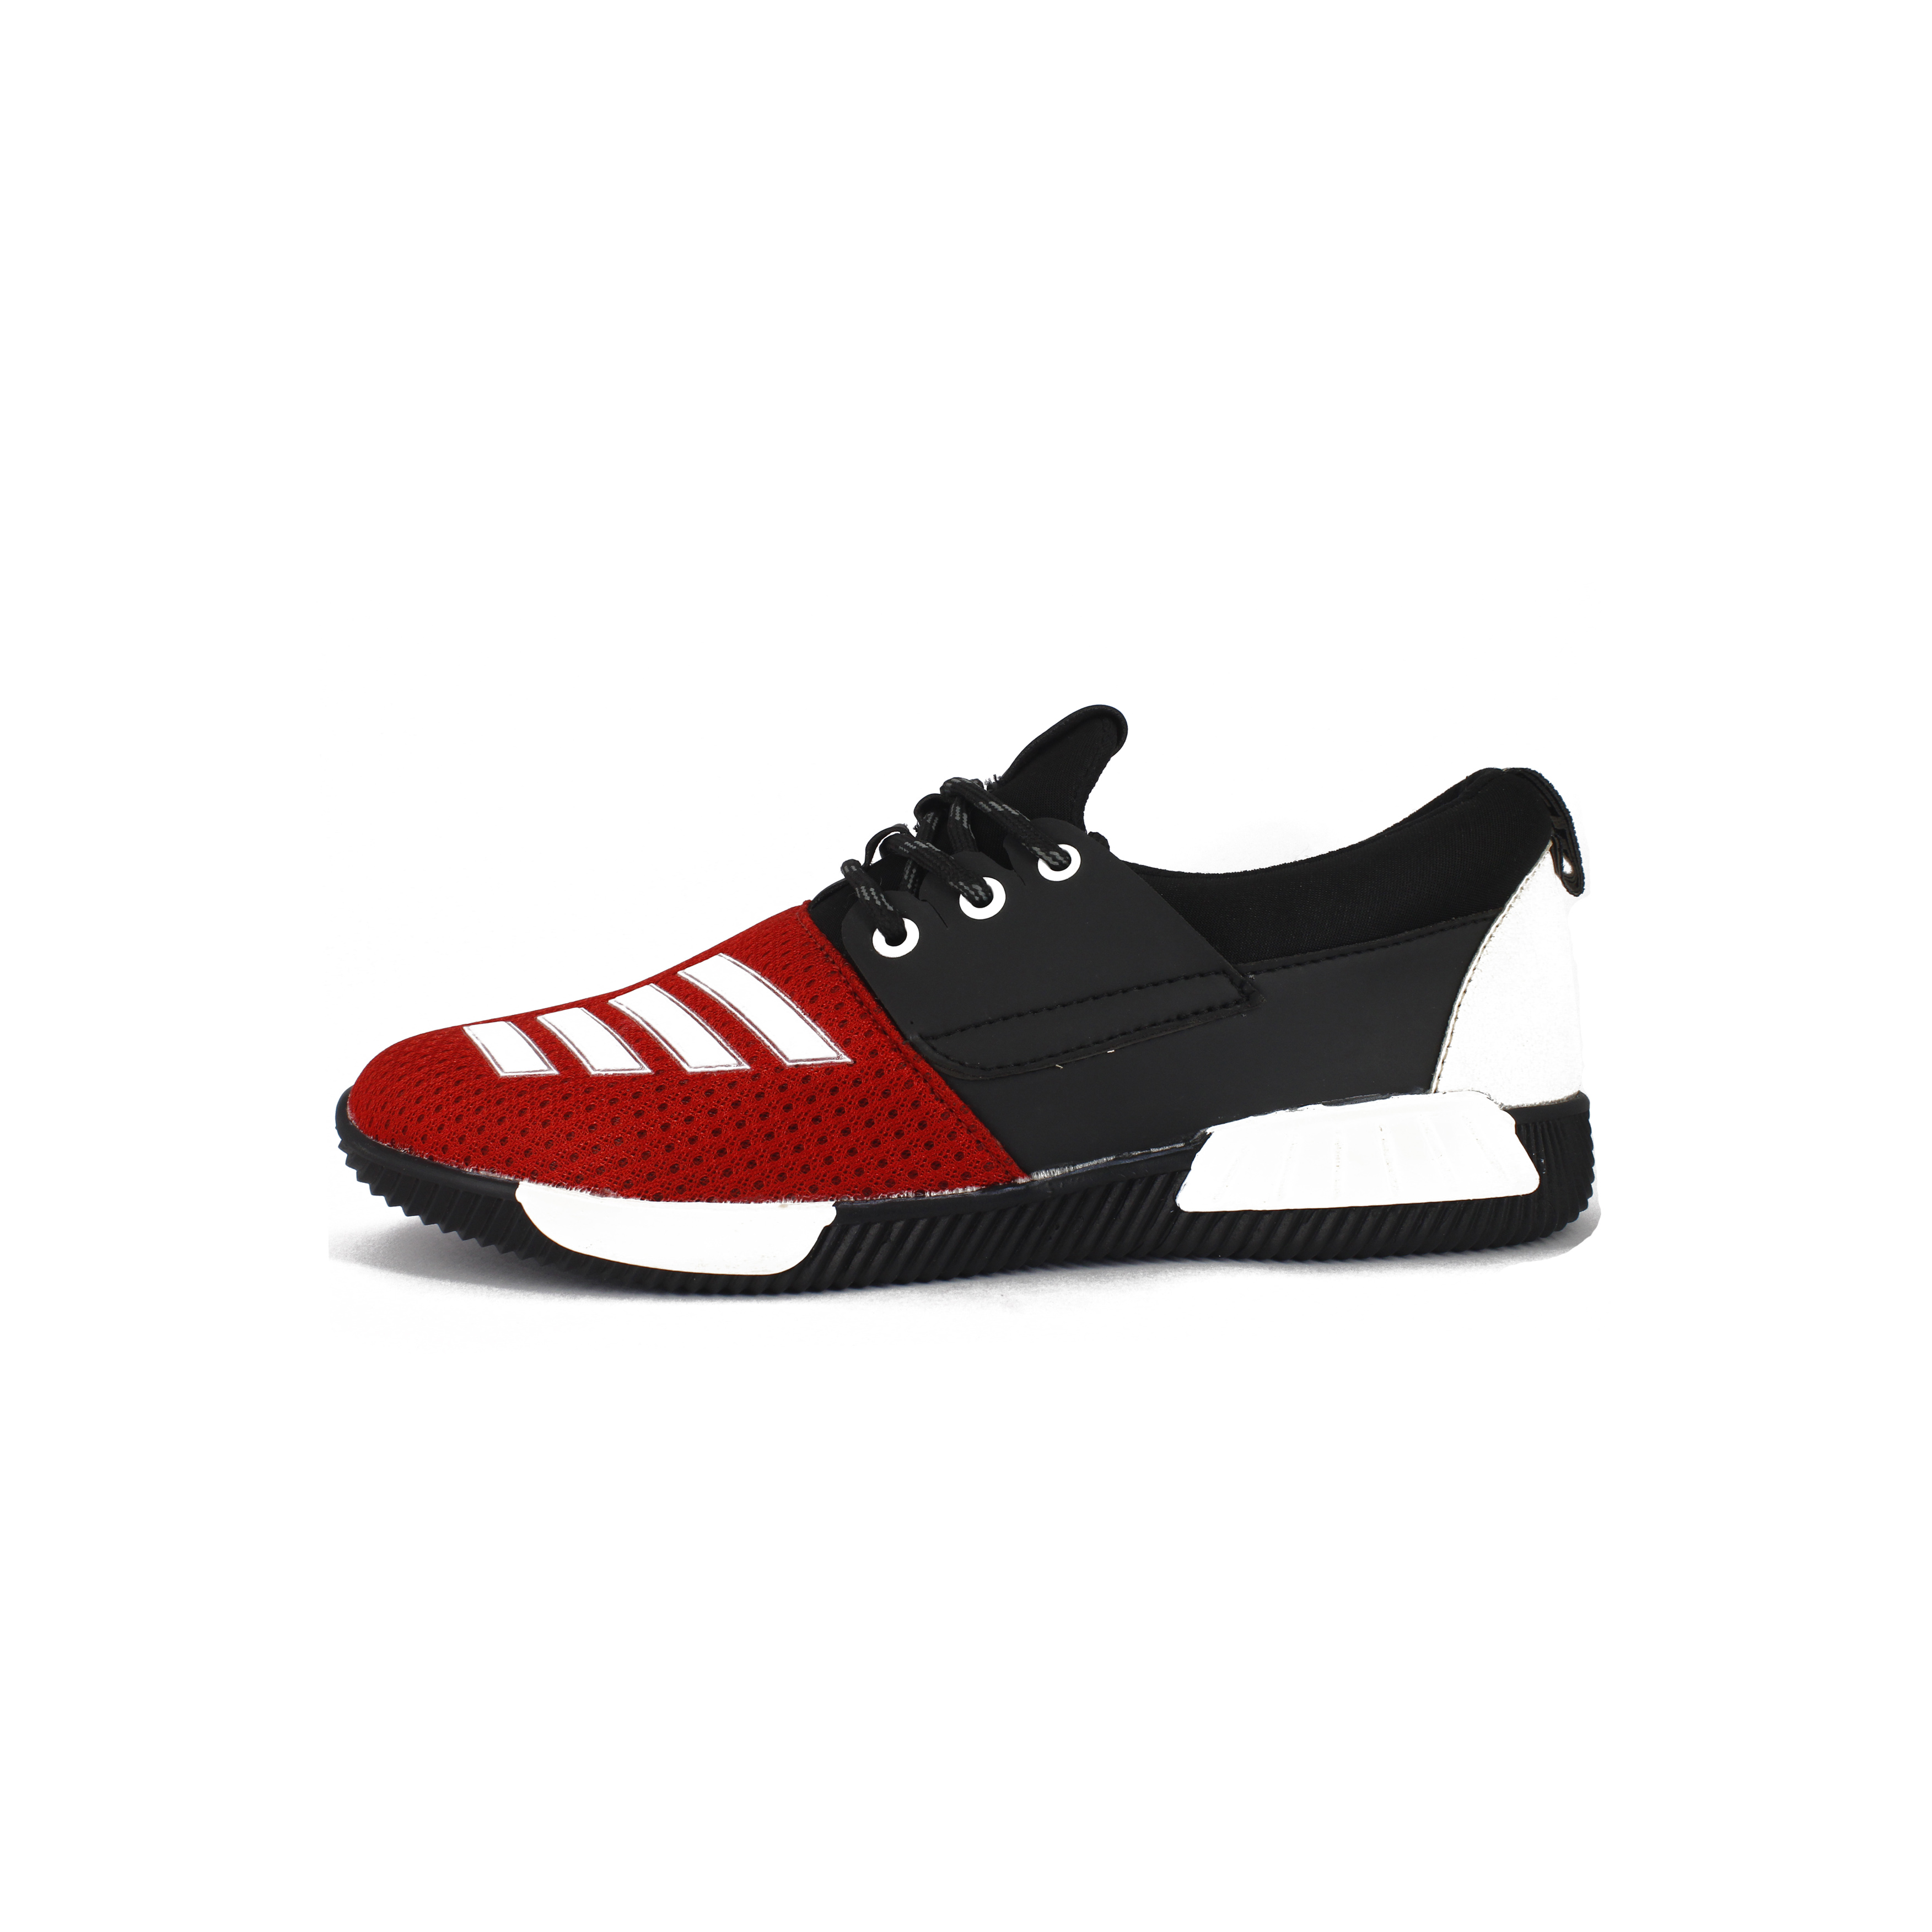 Buy Red Trump Casual Shoe Online @ ₹399 from ShopClues